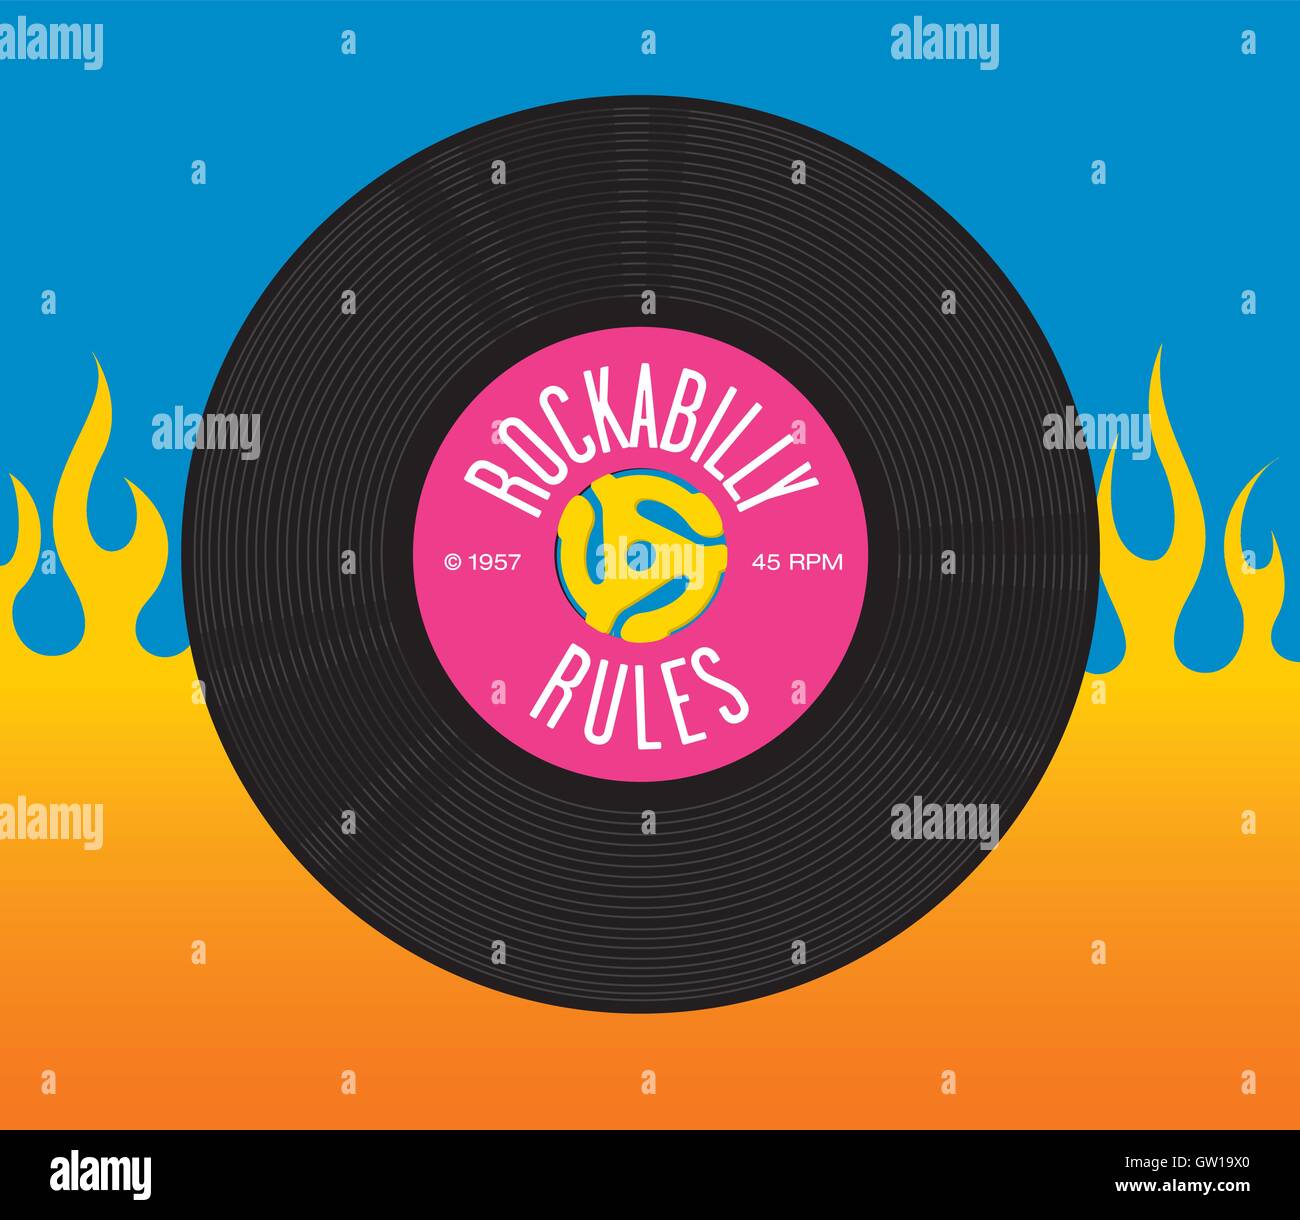 Rockabilly Rules Record Vector Design with flame background. 45rpm ...